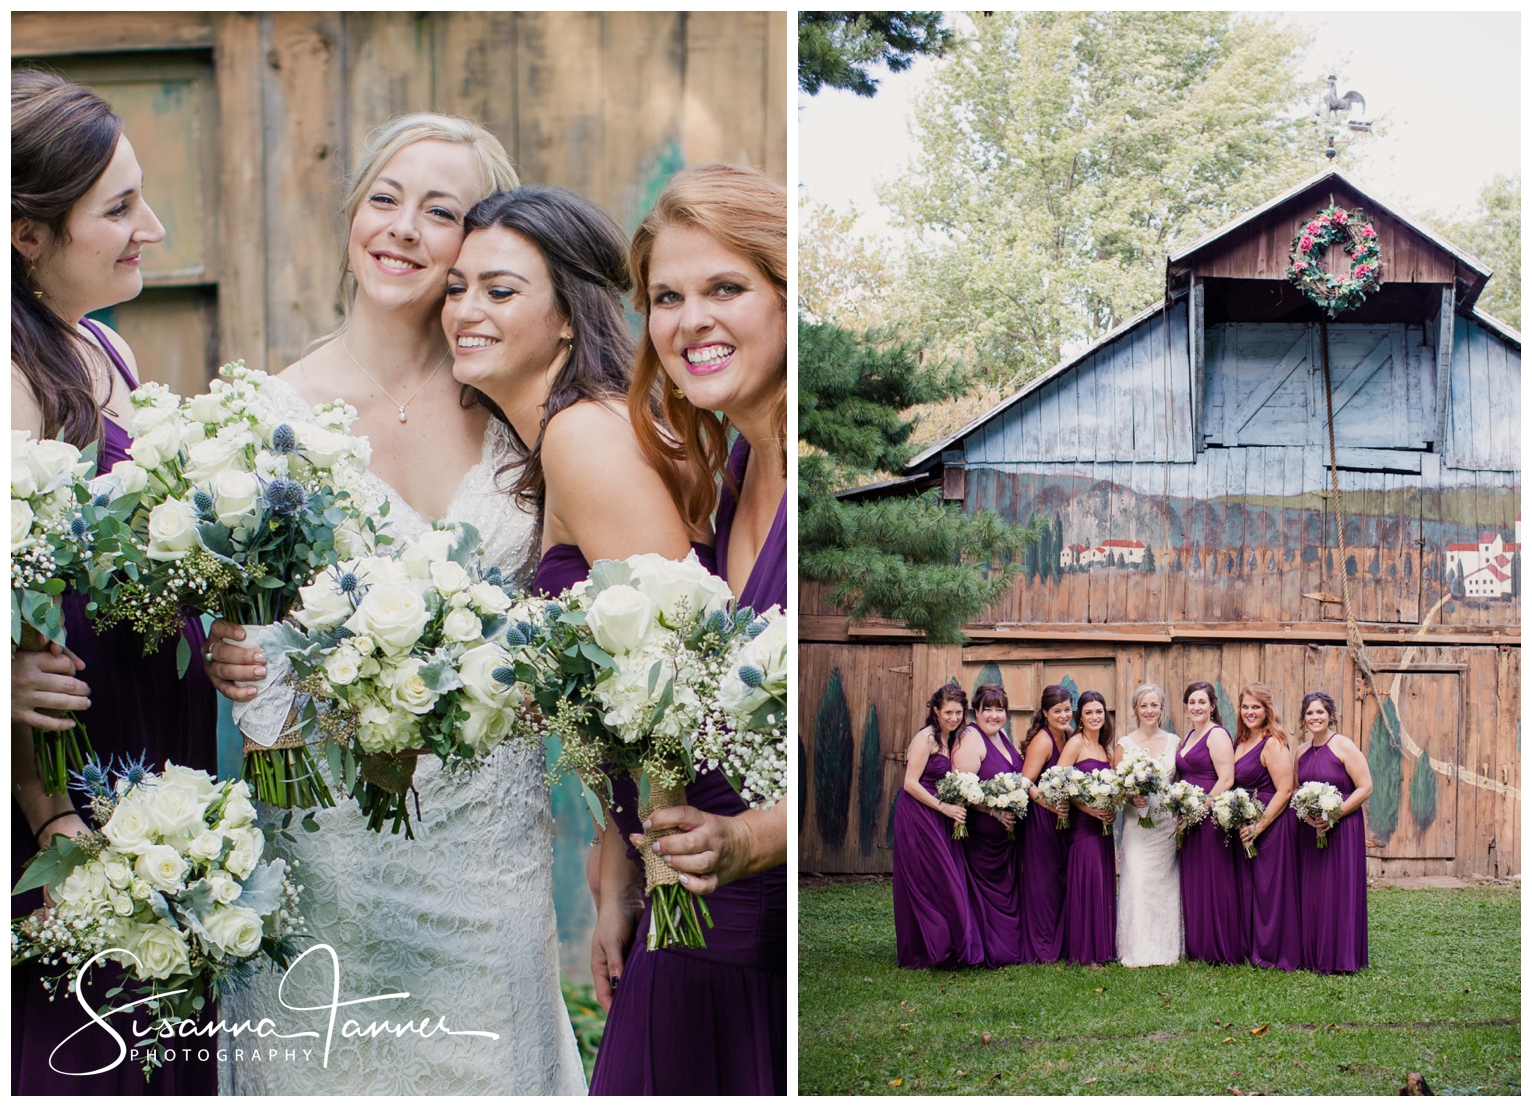 Indianapolis Outdoor Wedding, bride and bridesmaids smiling and being affectionate